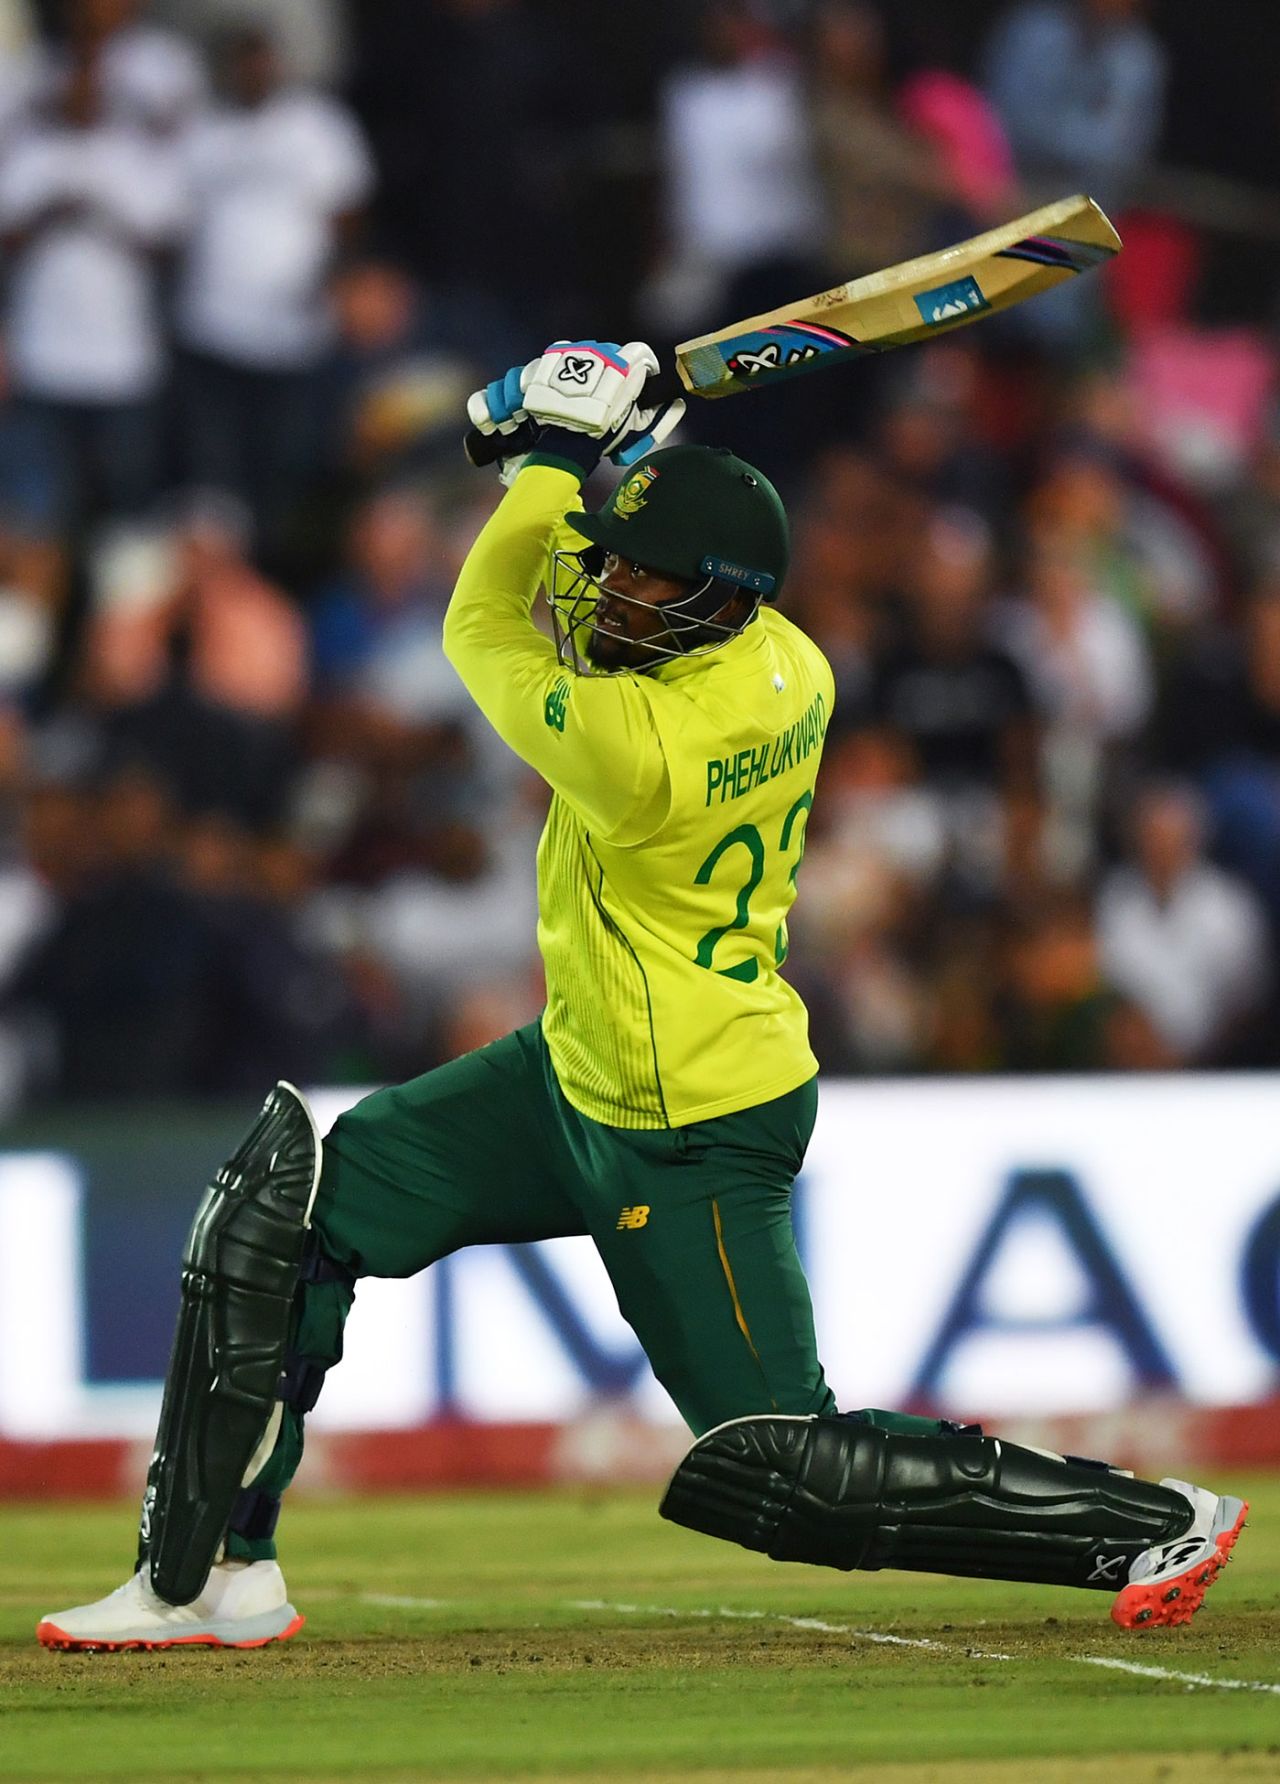 Andile Phehlukwayo drives for six over long-off, South Africa v England, 1st T20I, East London, February 12, 2020